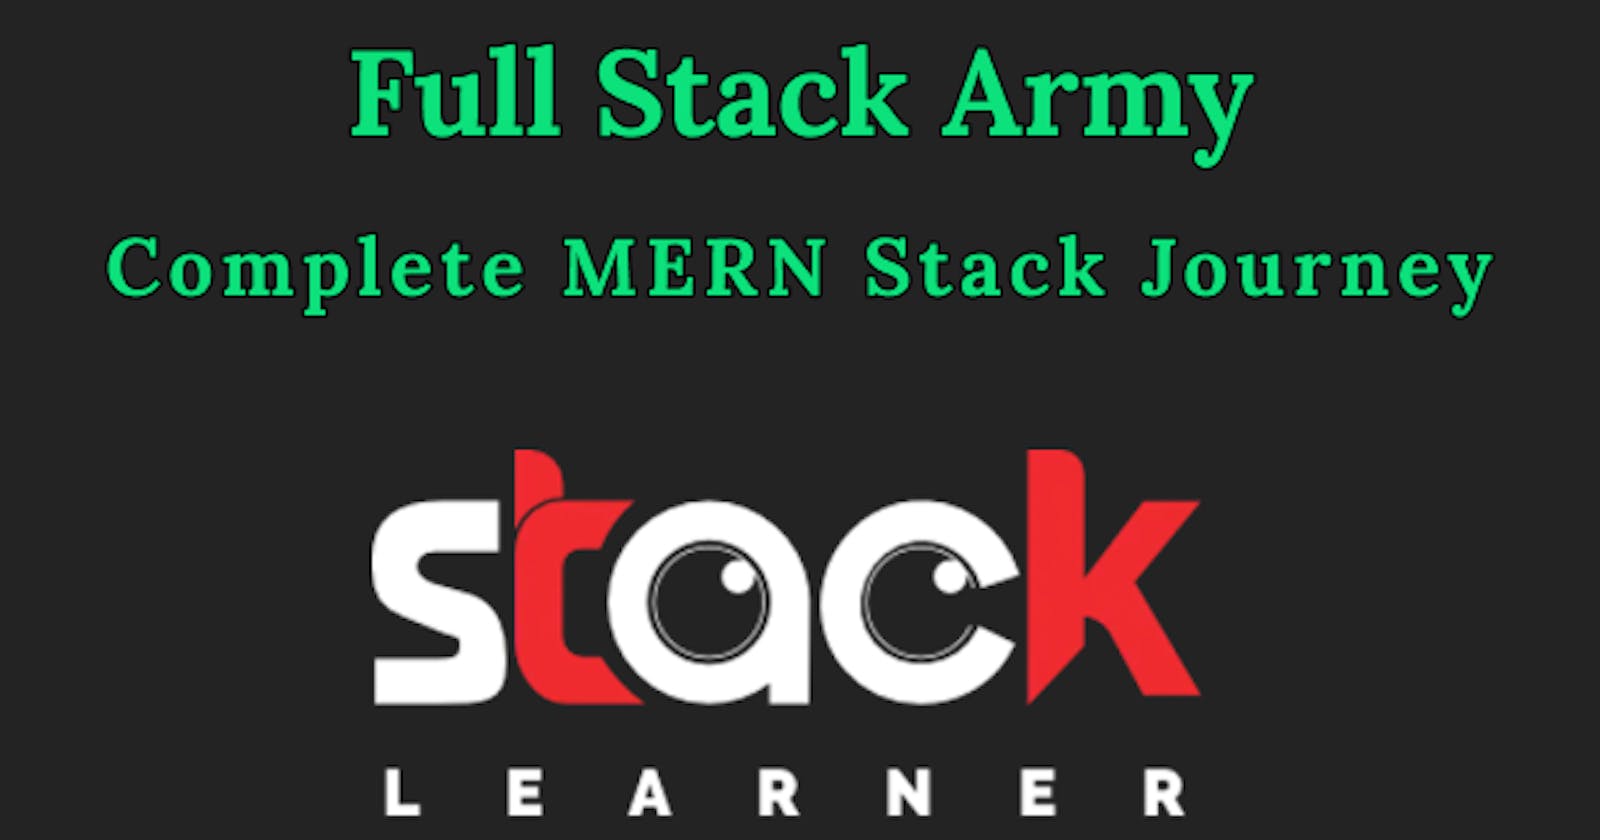 Full Stack Army - The Complete MERN Stack Journey